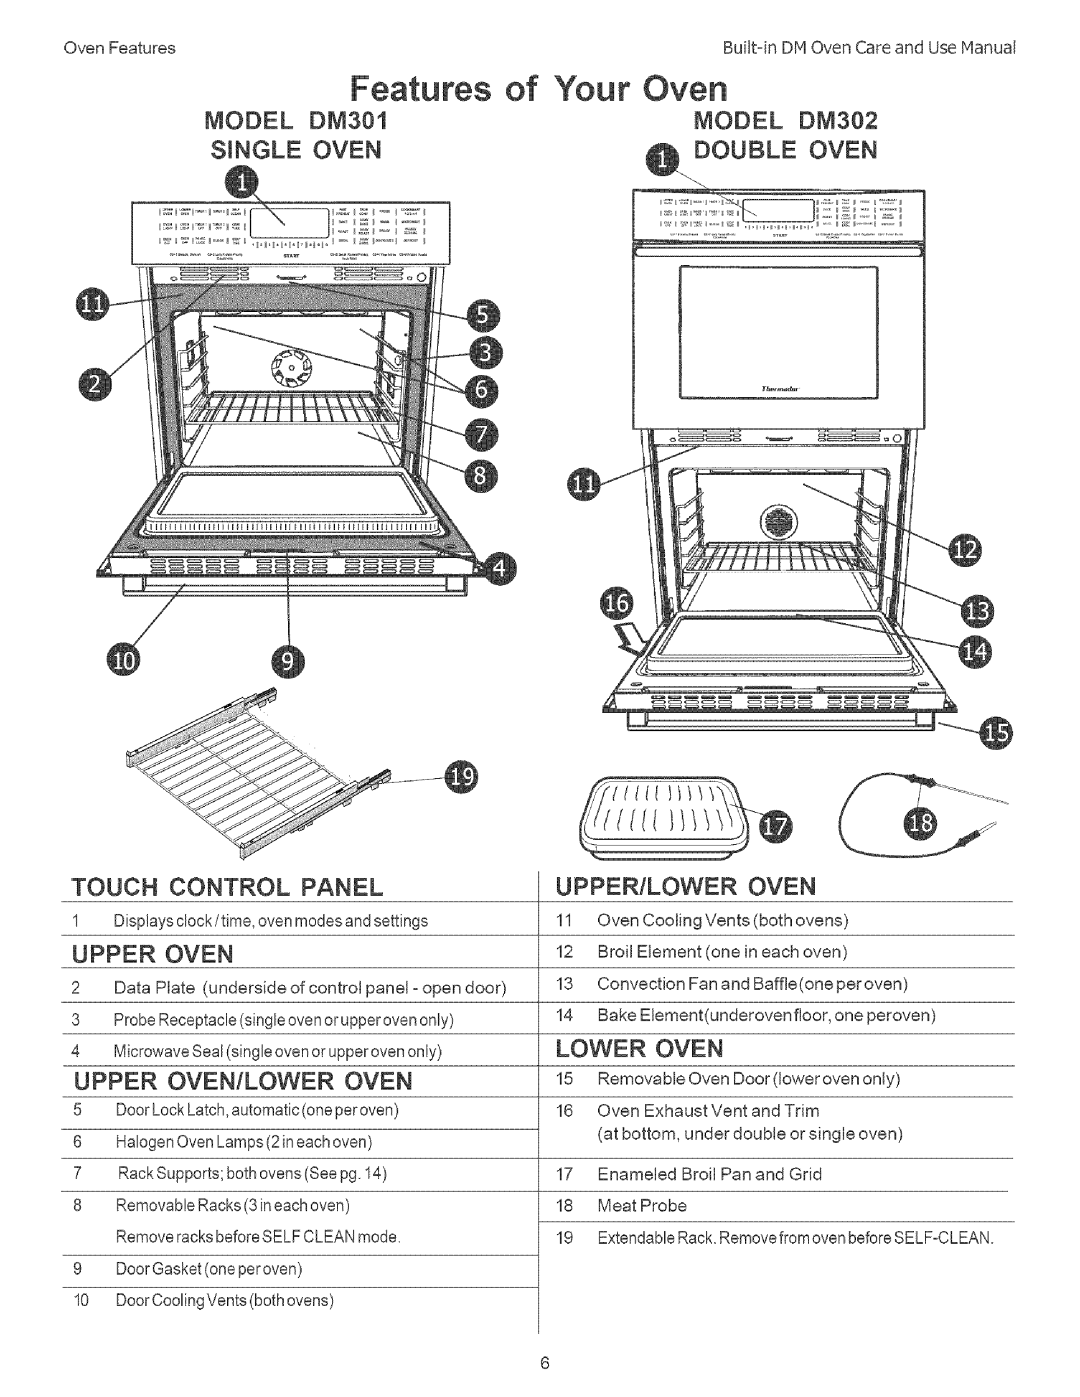 Thermador manual Features of, OvenFeatures, MODEL DM301 SINGLE OVEN, Oven MODEL DM302 DOUBLE OVEN, Touch Control Panel 